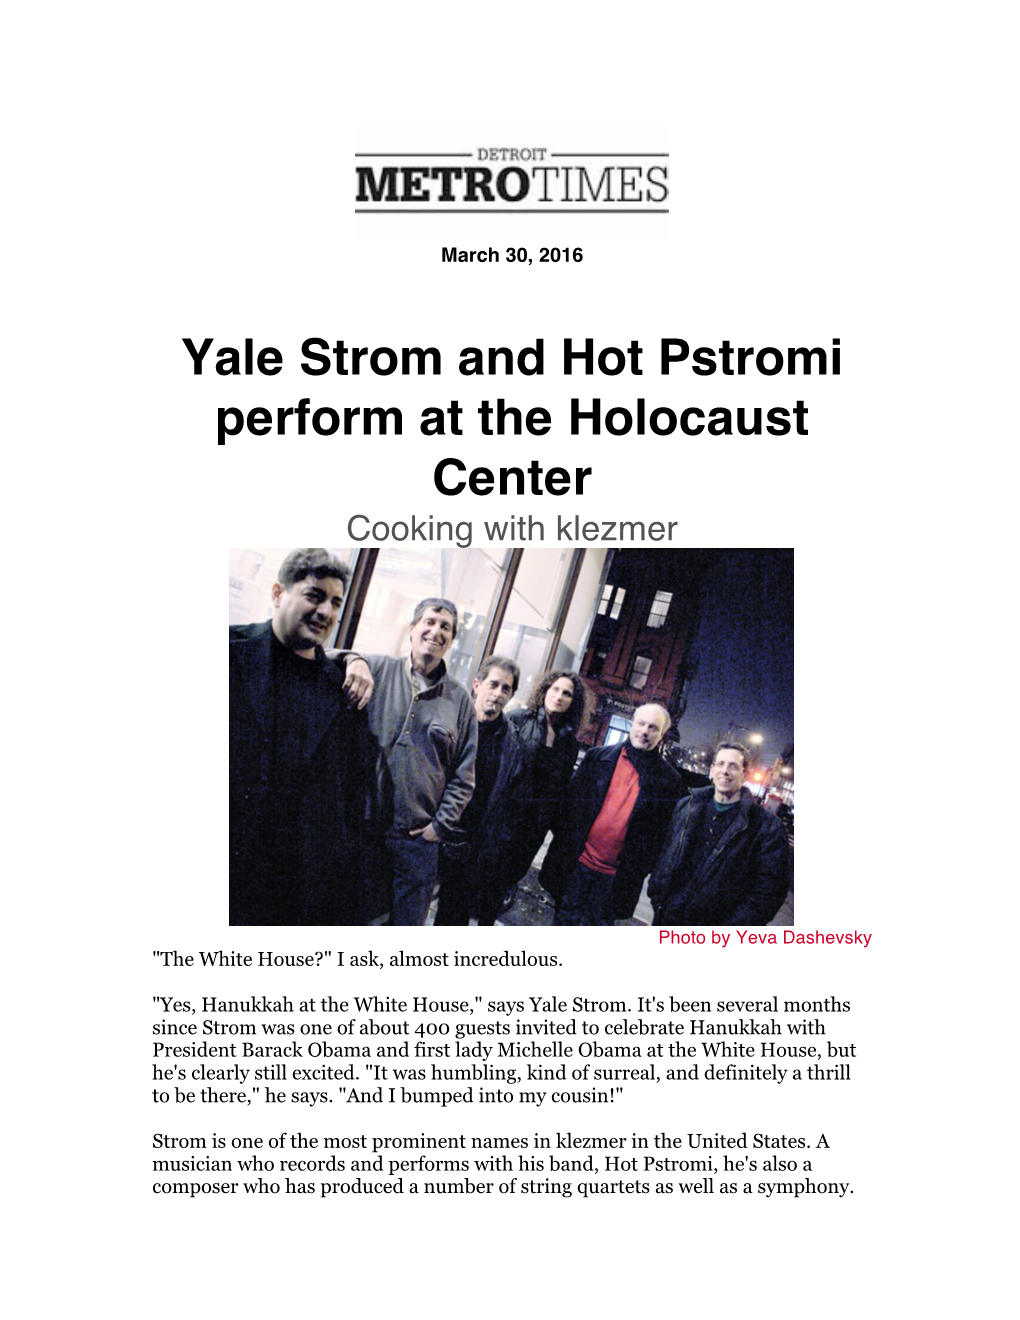 Yale Strom and Hot Pstromi Perform at the Holocaust Center Cooking with Klezmer